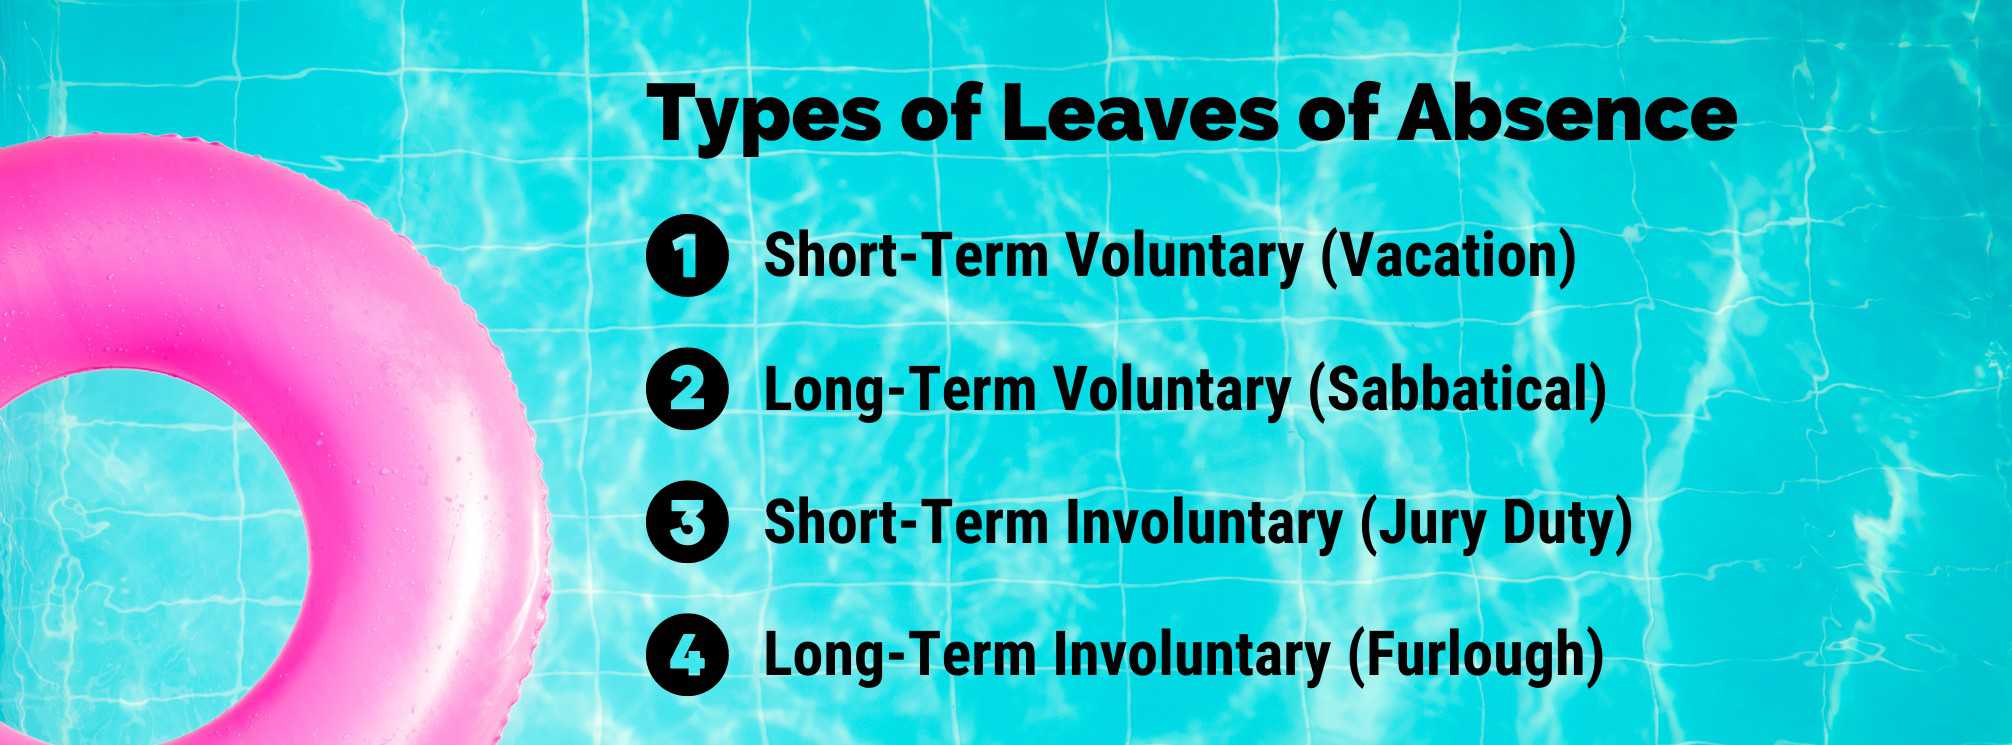 types of employee leaves of absence